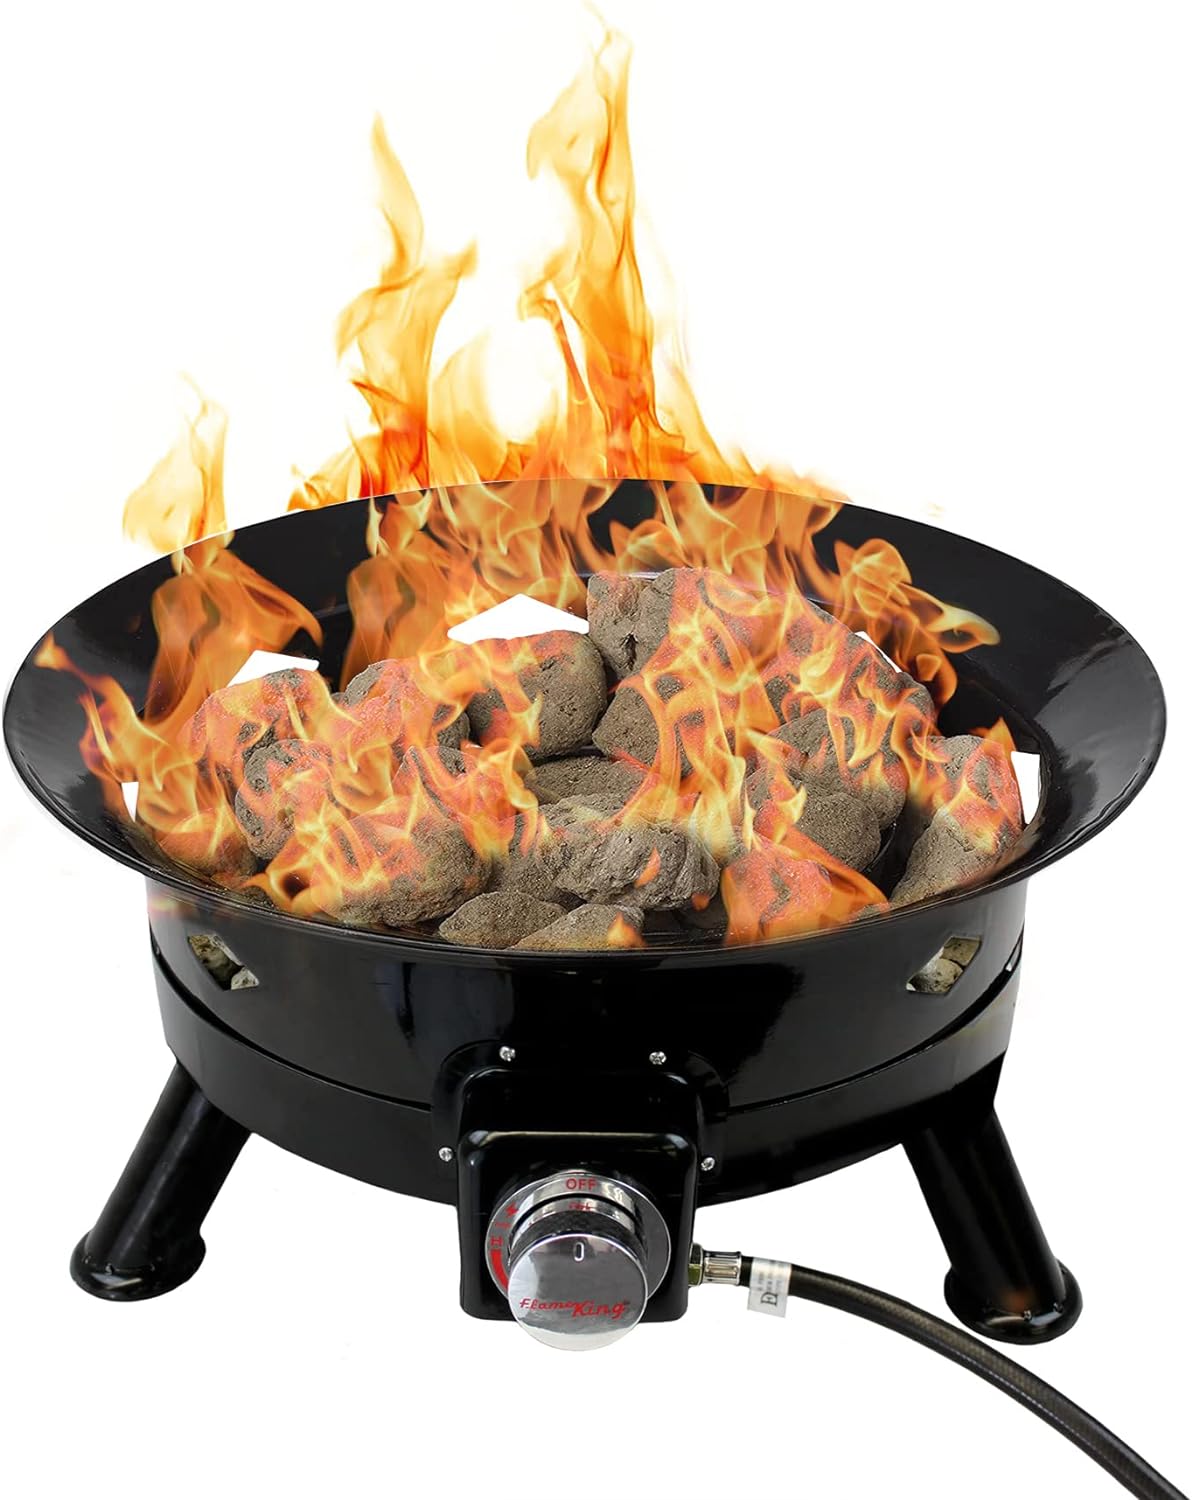 Flame King Smokeless Propane Fire Pit Review